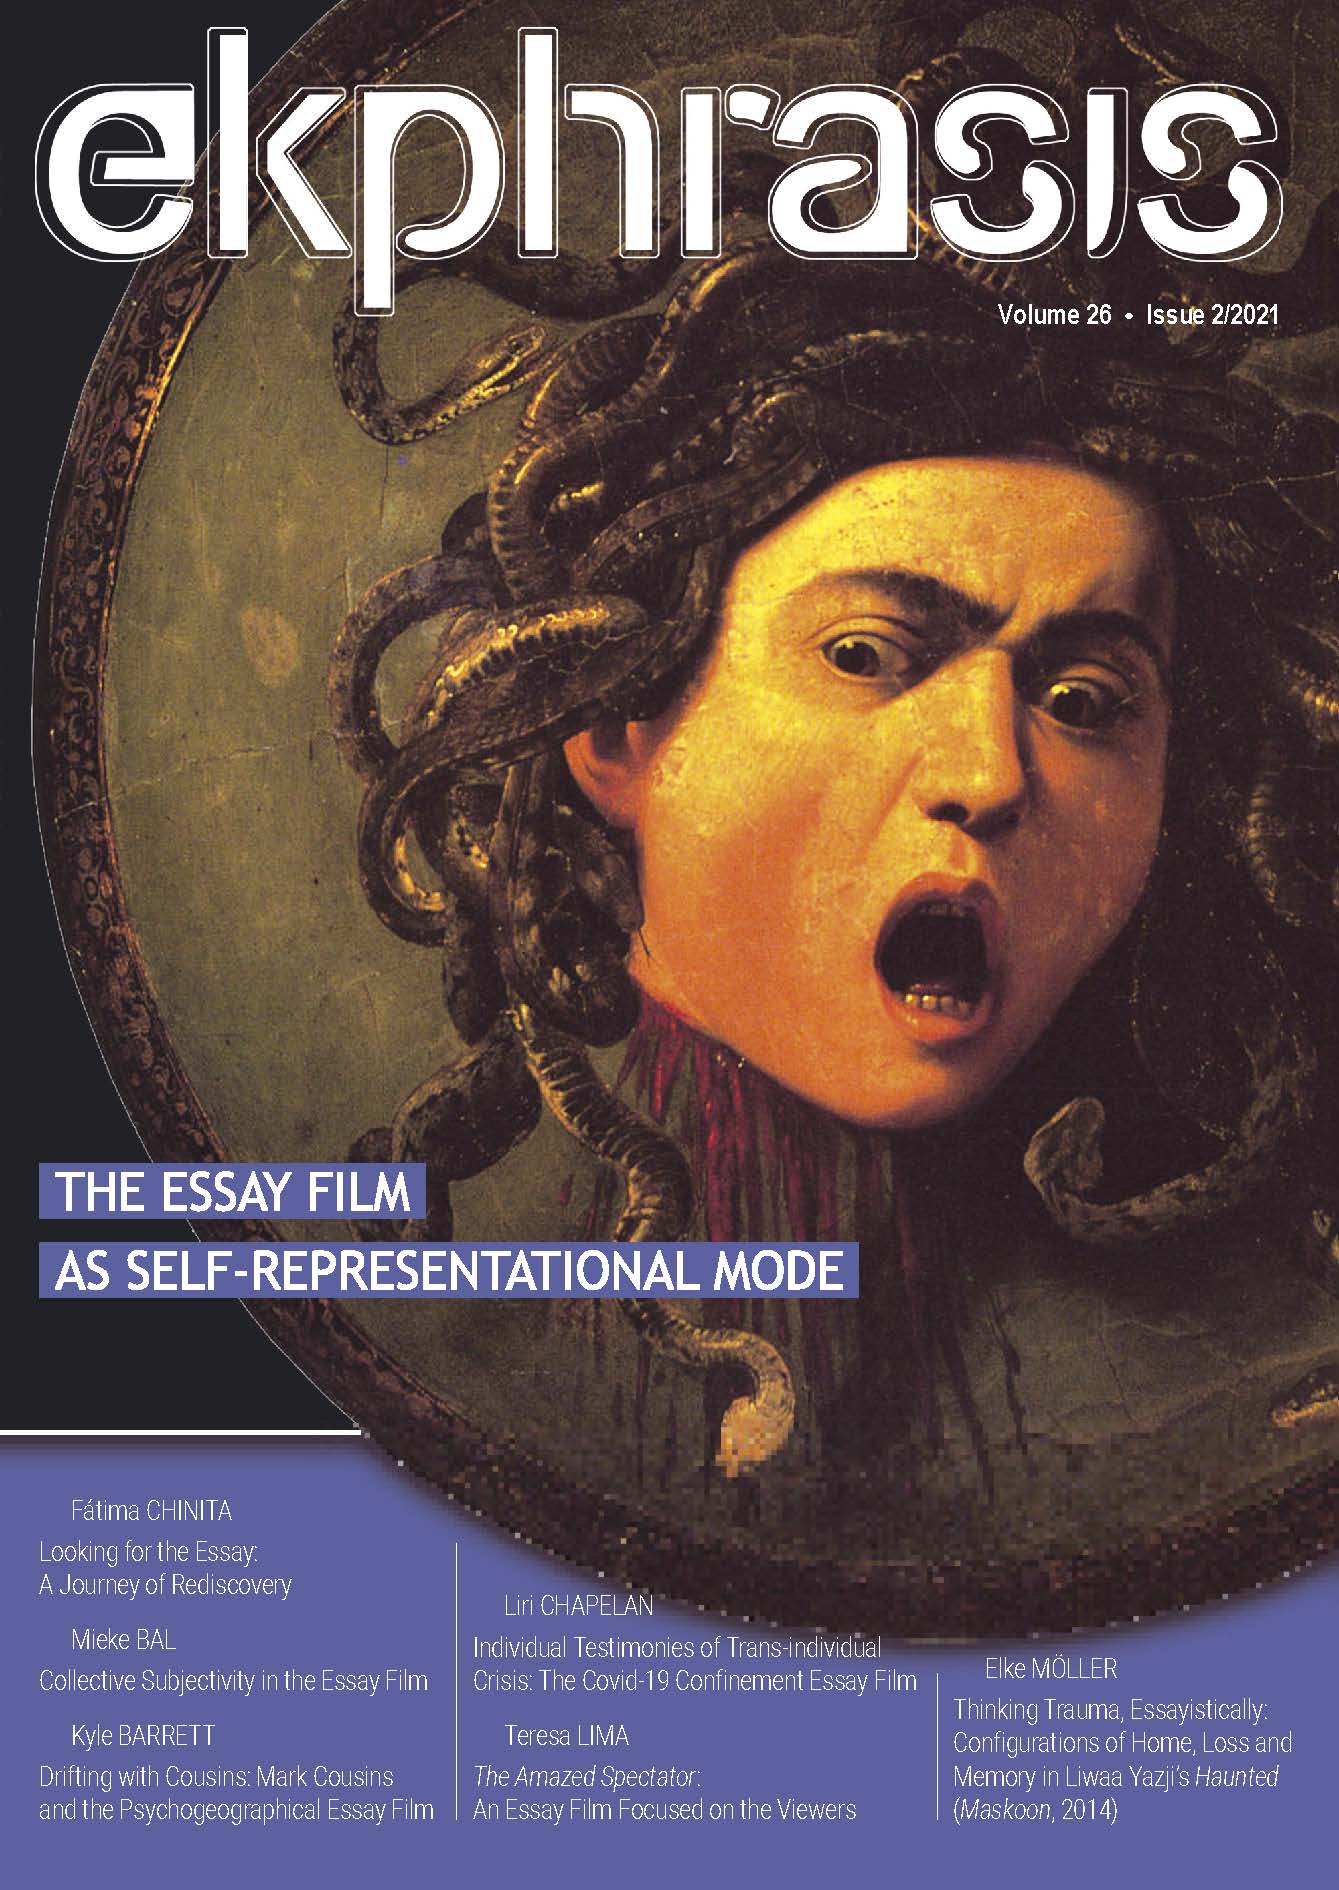 World Cinema and the Essay Film: Research into Transnational Modes of Thought and Meaning-making Cover Image